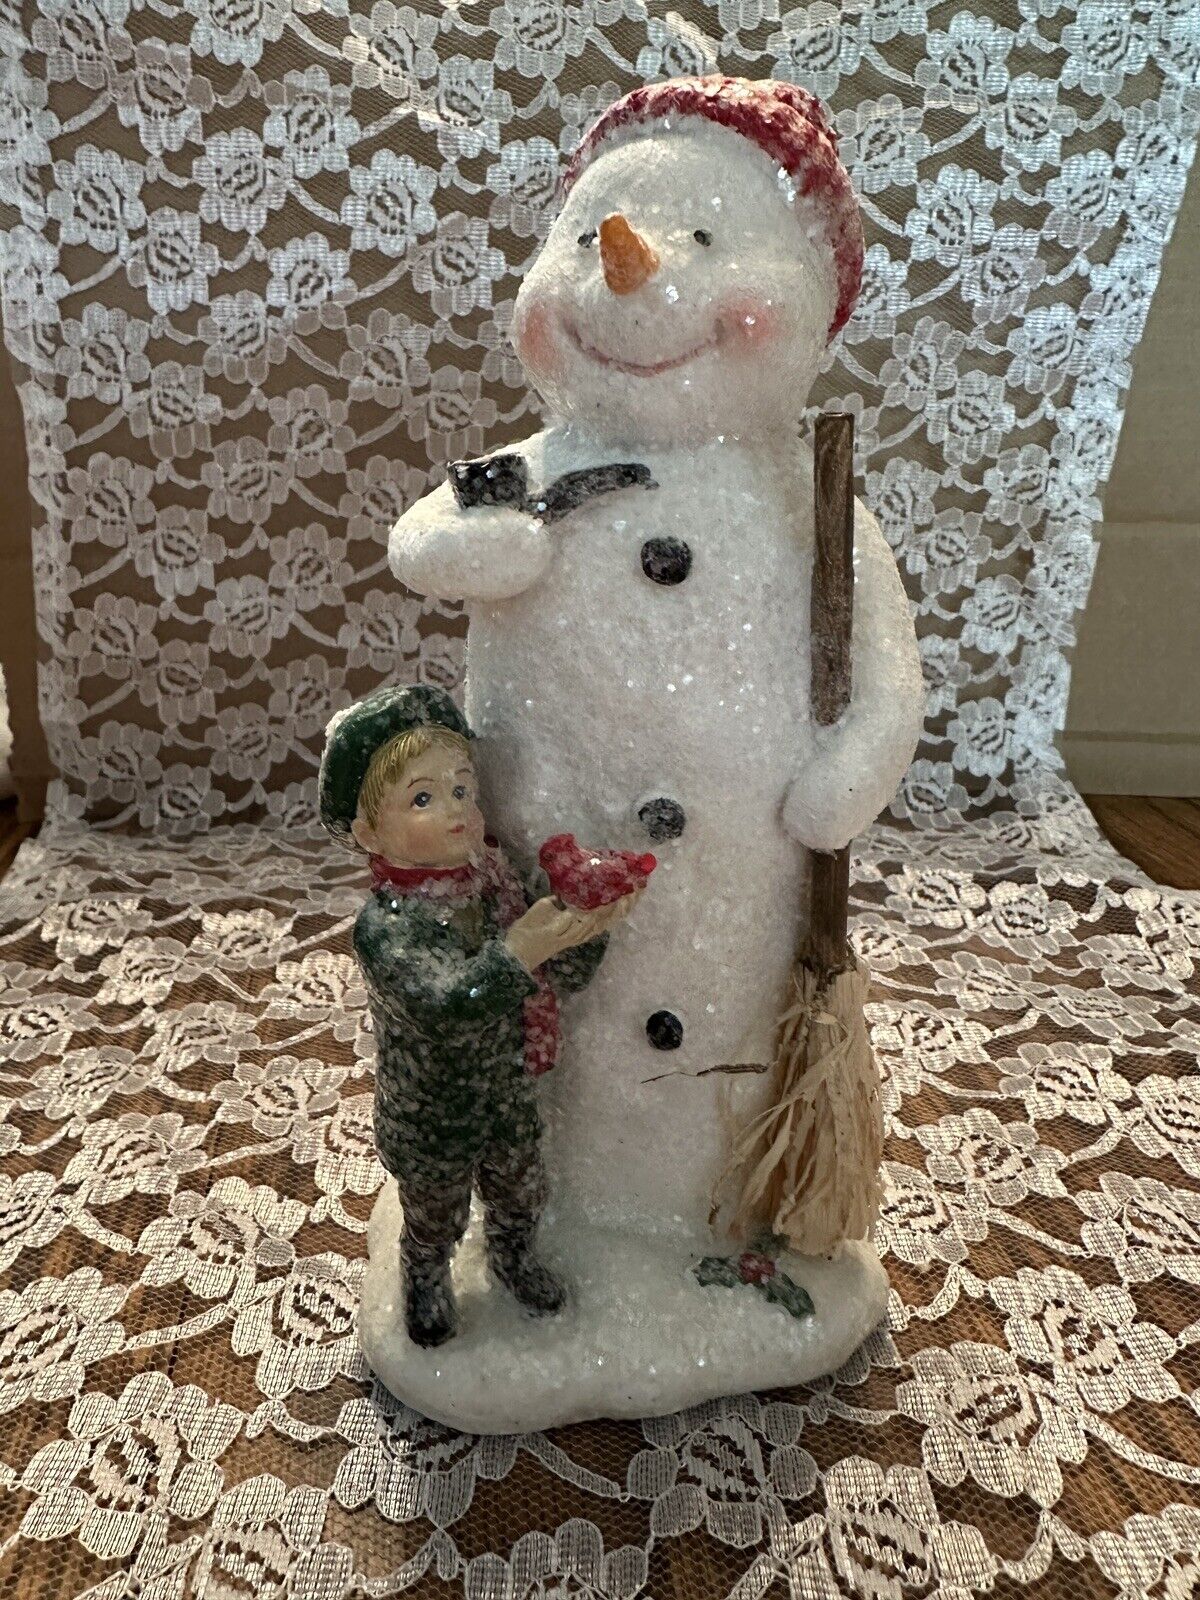 Vintage Sparkly Frosty “Snowman” Resin Figurine Old World Look.